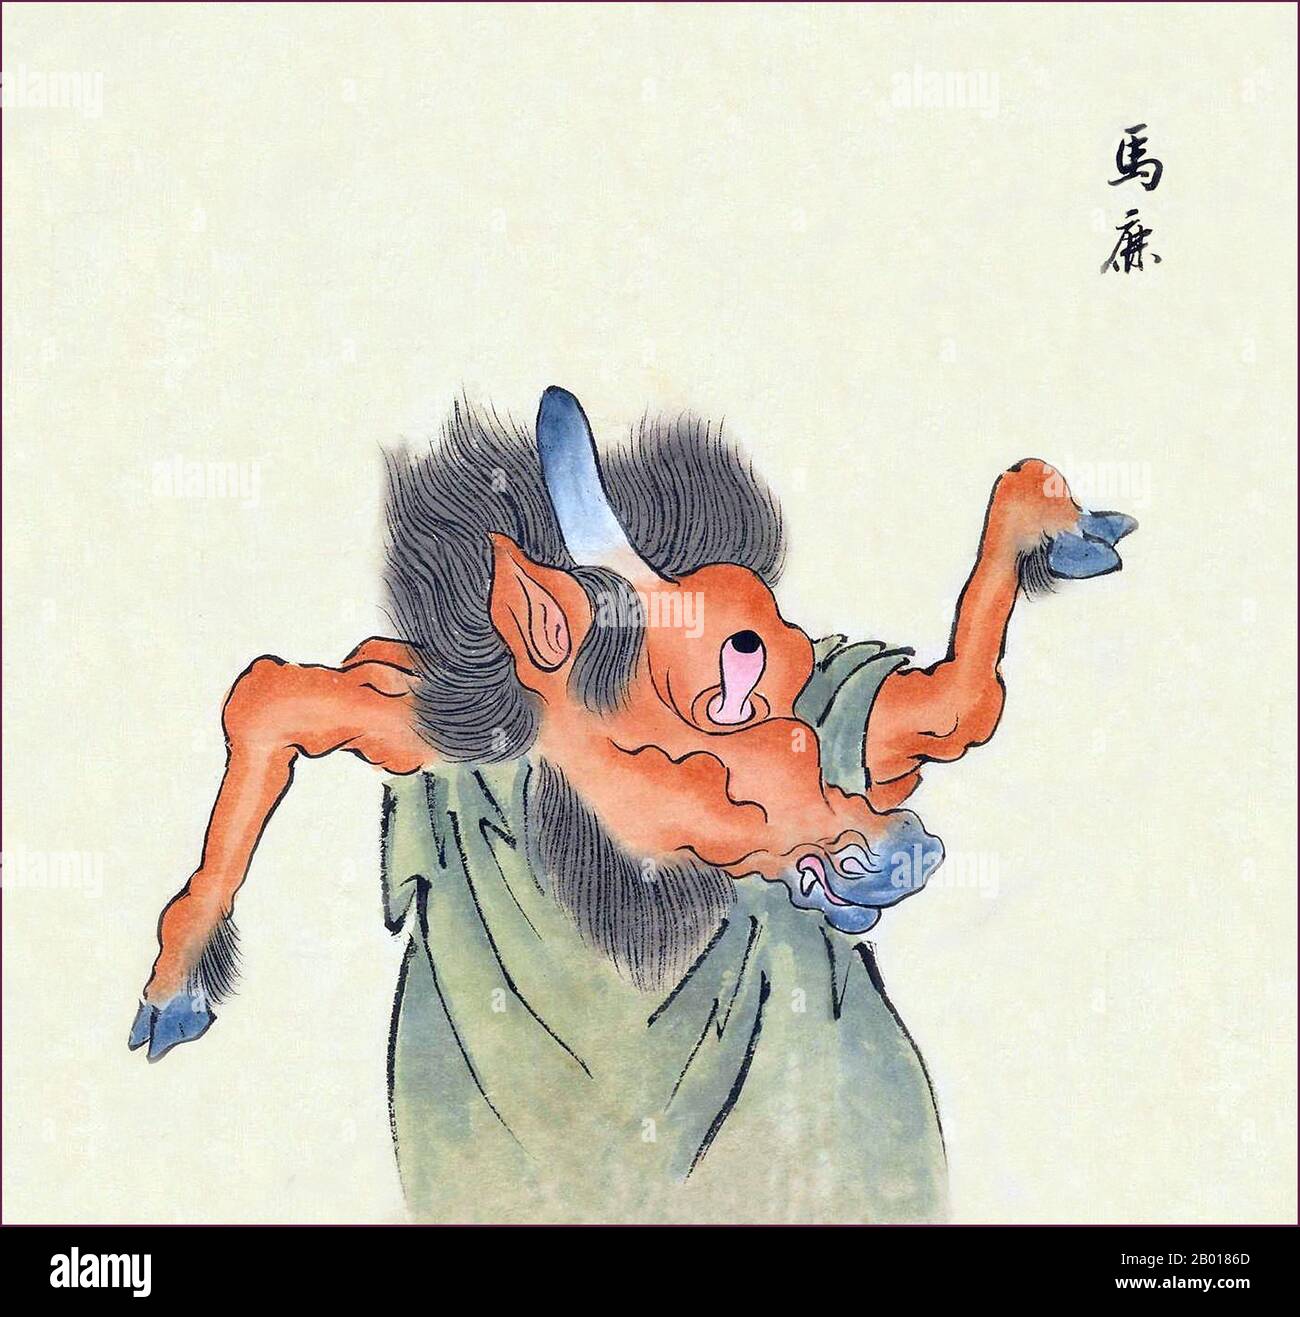 Japan: The Uma-shika is a horse-like monster with a horn on its head and a single bulging eye. From the Bakemono Zukushi Monster Scroll, Edo Period (1603-1868), 18th-19th century. Stock Photo